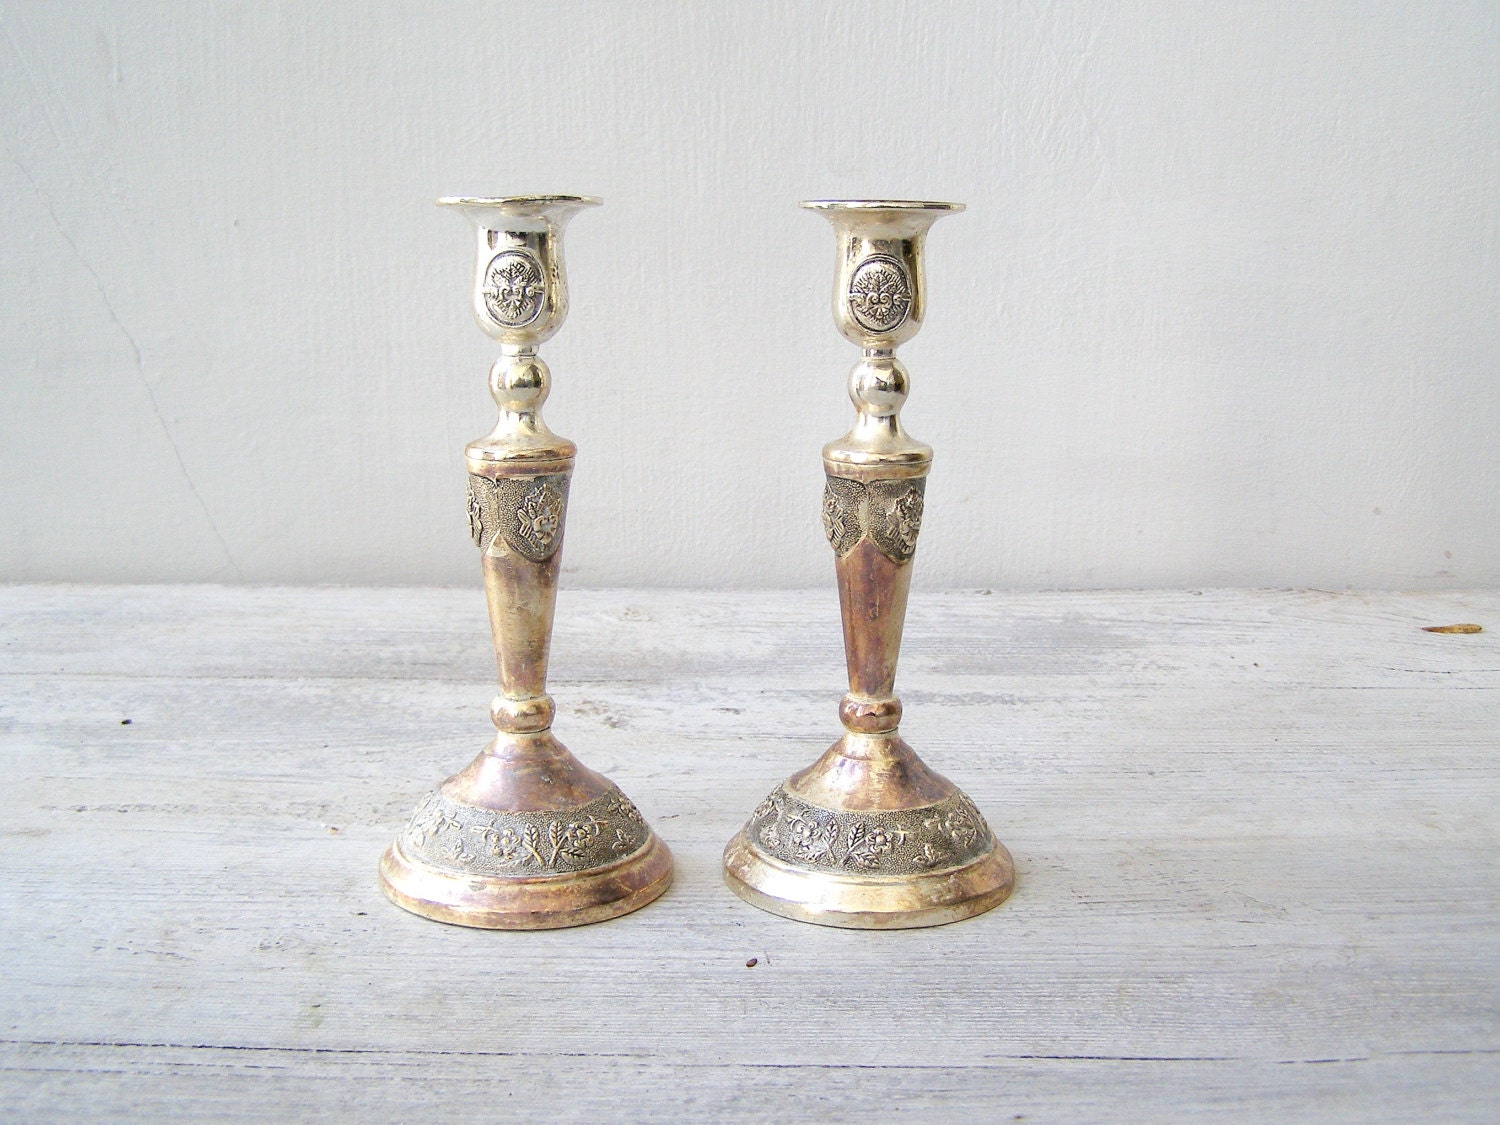 Art Nouveau Silver plated Candle Sticks, Vintage Ornate candle holders, Retro Tableware, wedding newlywed gift, Victorian style Downton - MeshuMaSH